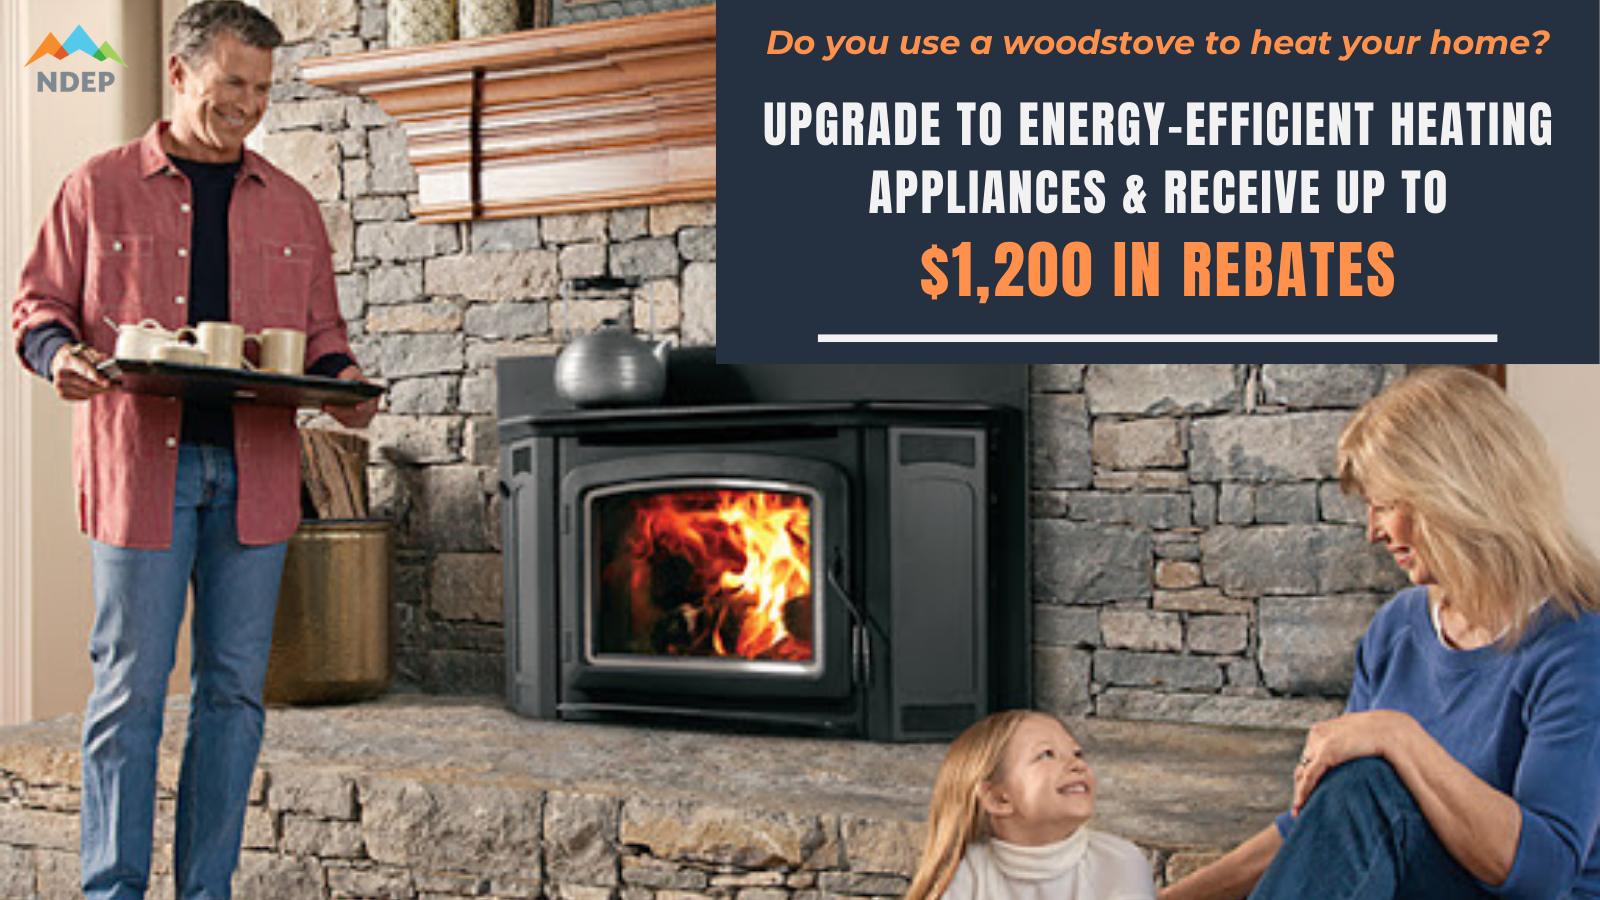 up-to-1-200-in-rebates-now-available-for-energy-efficient-household